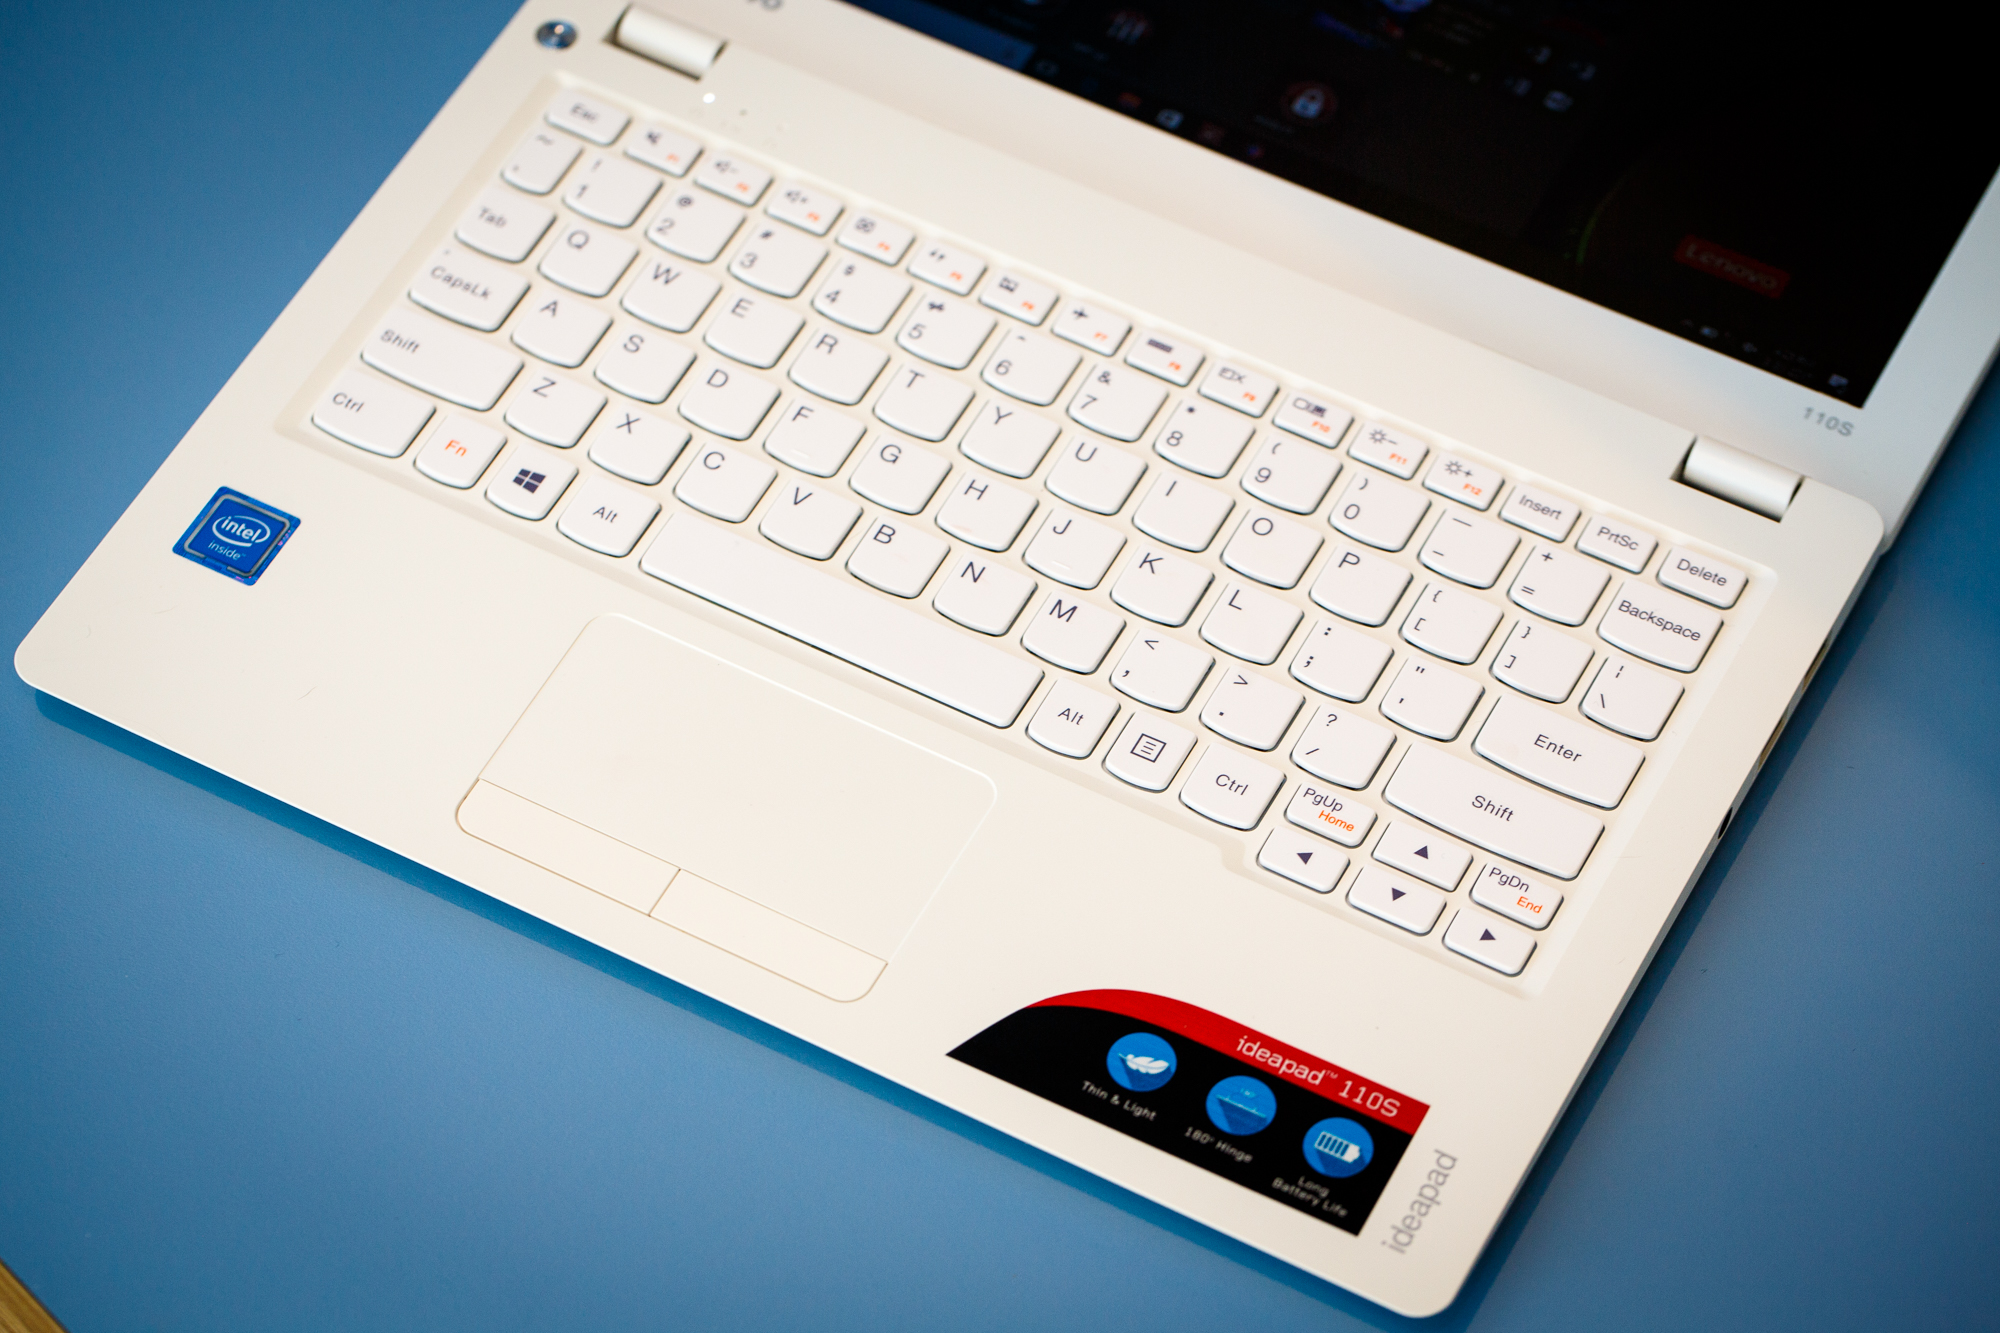 Lenovo Ideapad 110s review: A chic and cheap laptop with a killer keyboard  - CNET